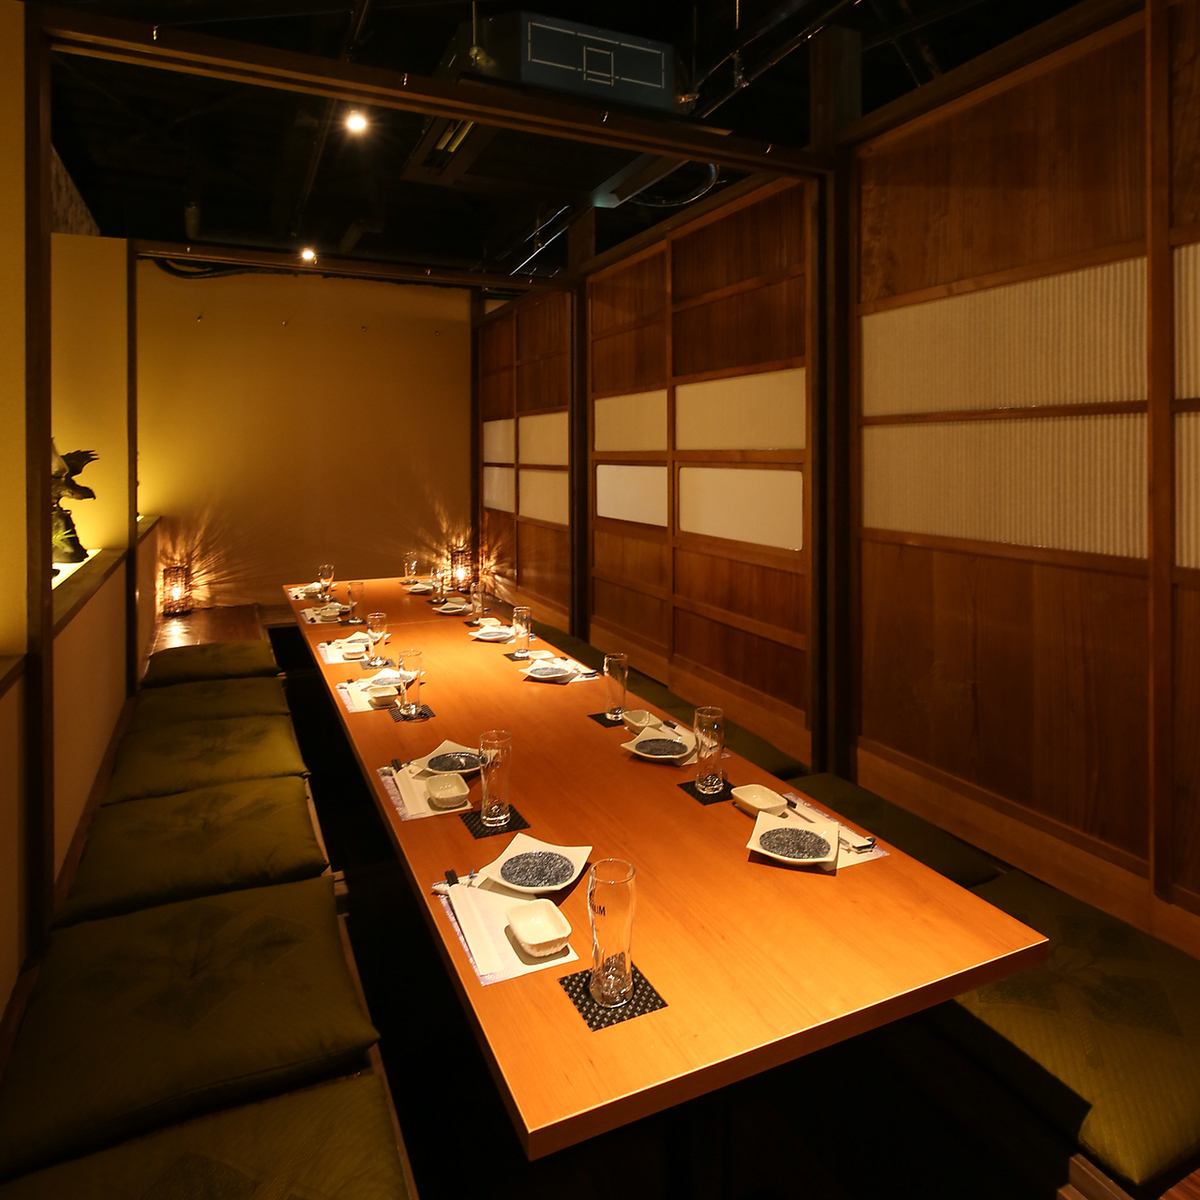 A private room with a sunken kotatsu table can accommodate up to 80 people. Feel free to hold any type of banquet.